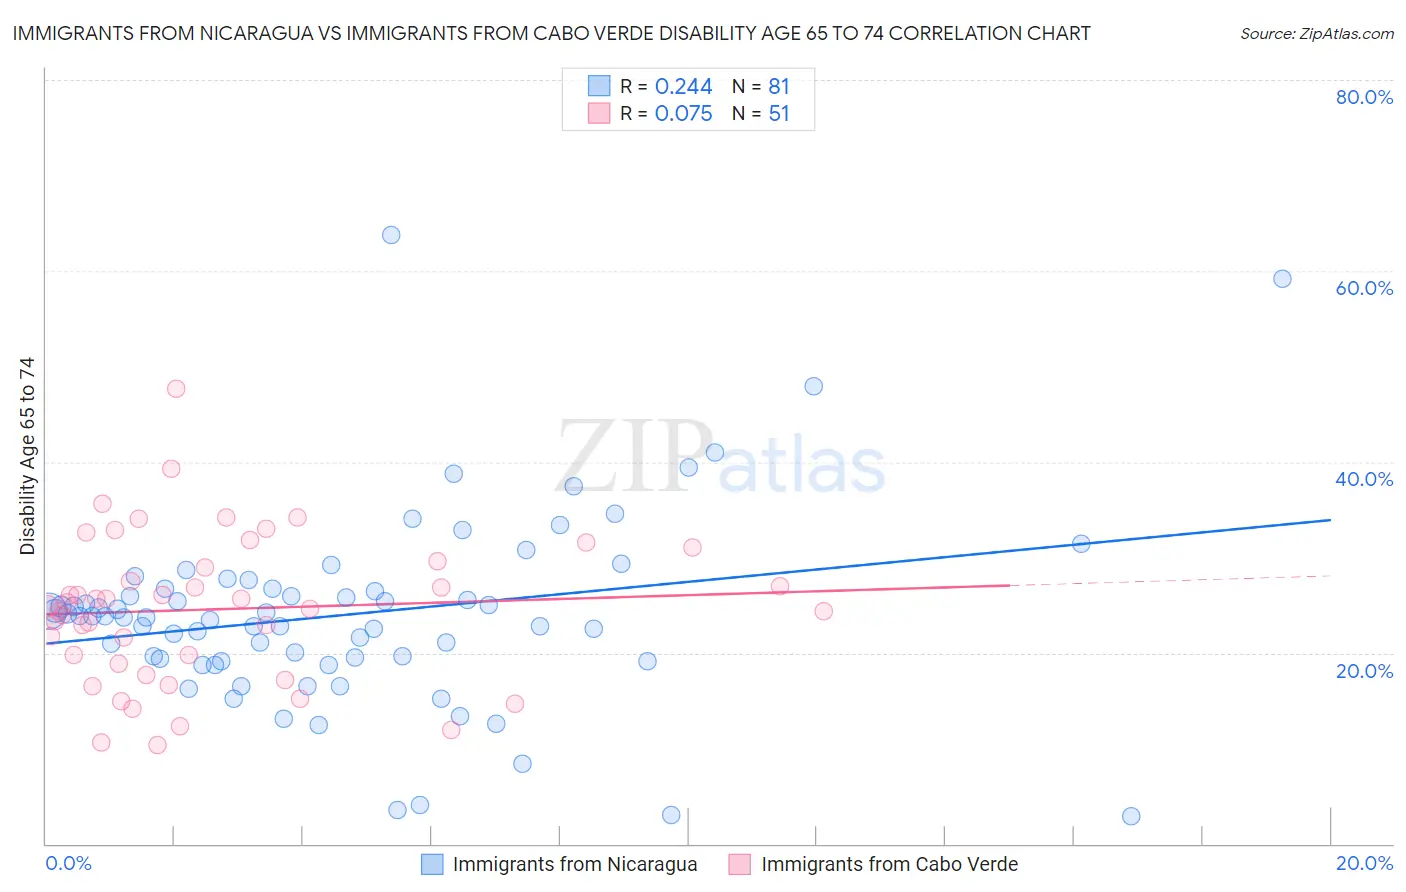 Immigrants from Nicaragua vs Immigrants from Cabo Verde Disability Age 65 to 74